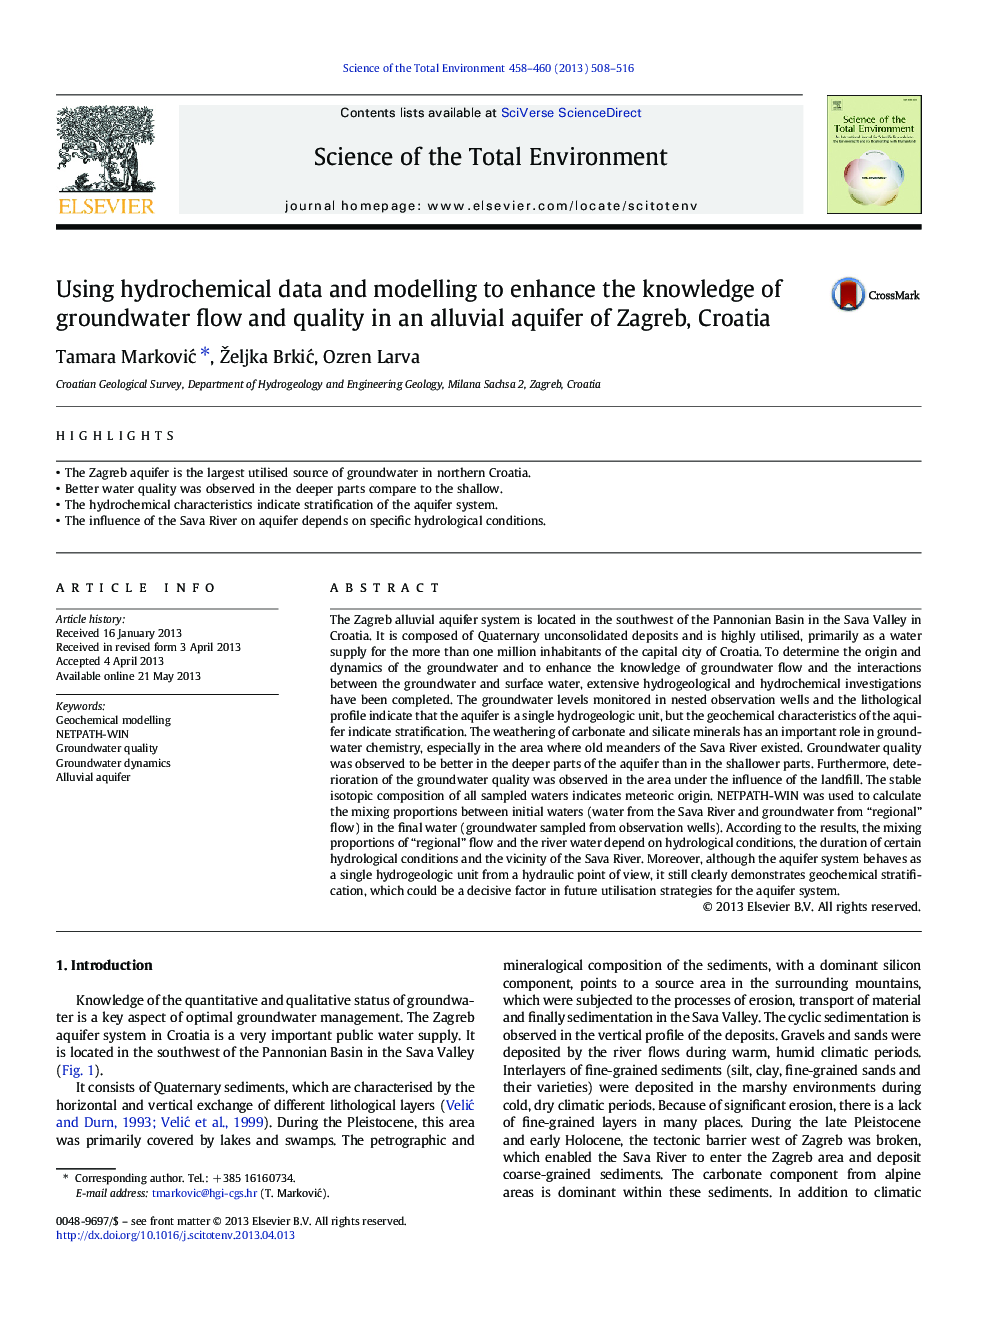 Using hydrochemical data and modelling to enhance the knowledge of groundwater flow and quality in an alluvial aquifer of Zagreb, Croatia